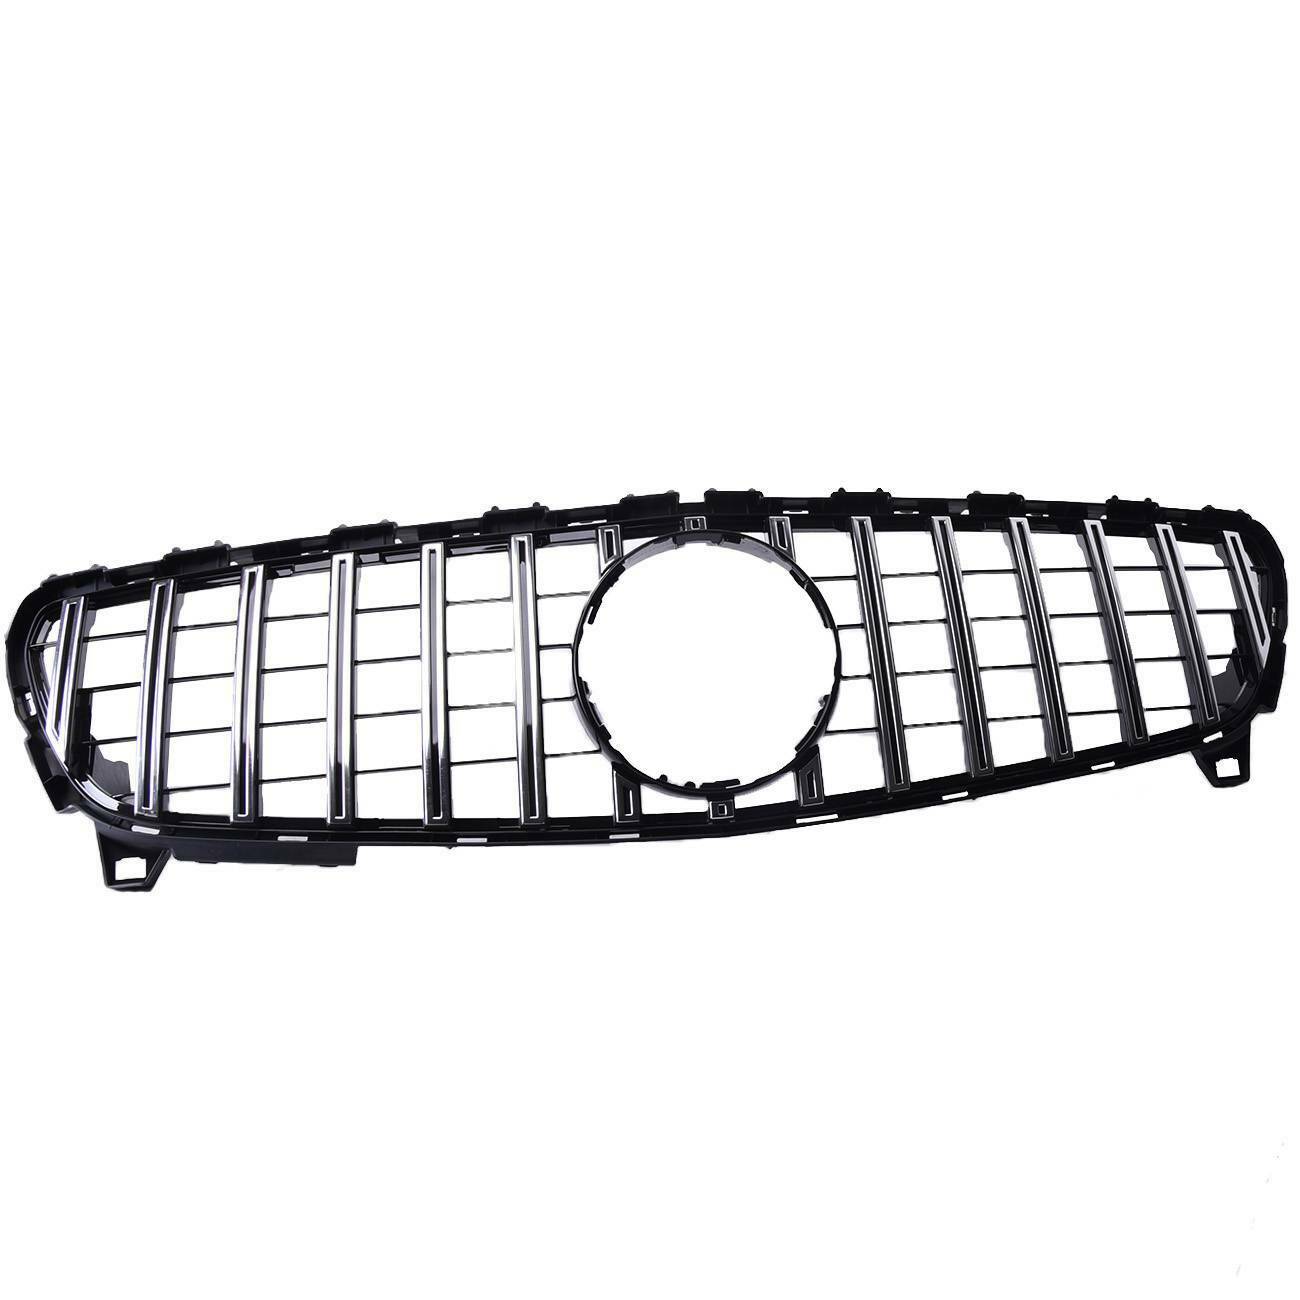 Front Grille Kit for Mercedes W176 A180 A200 A160 4-MATIC A1768800483 German Made